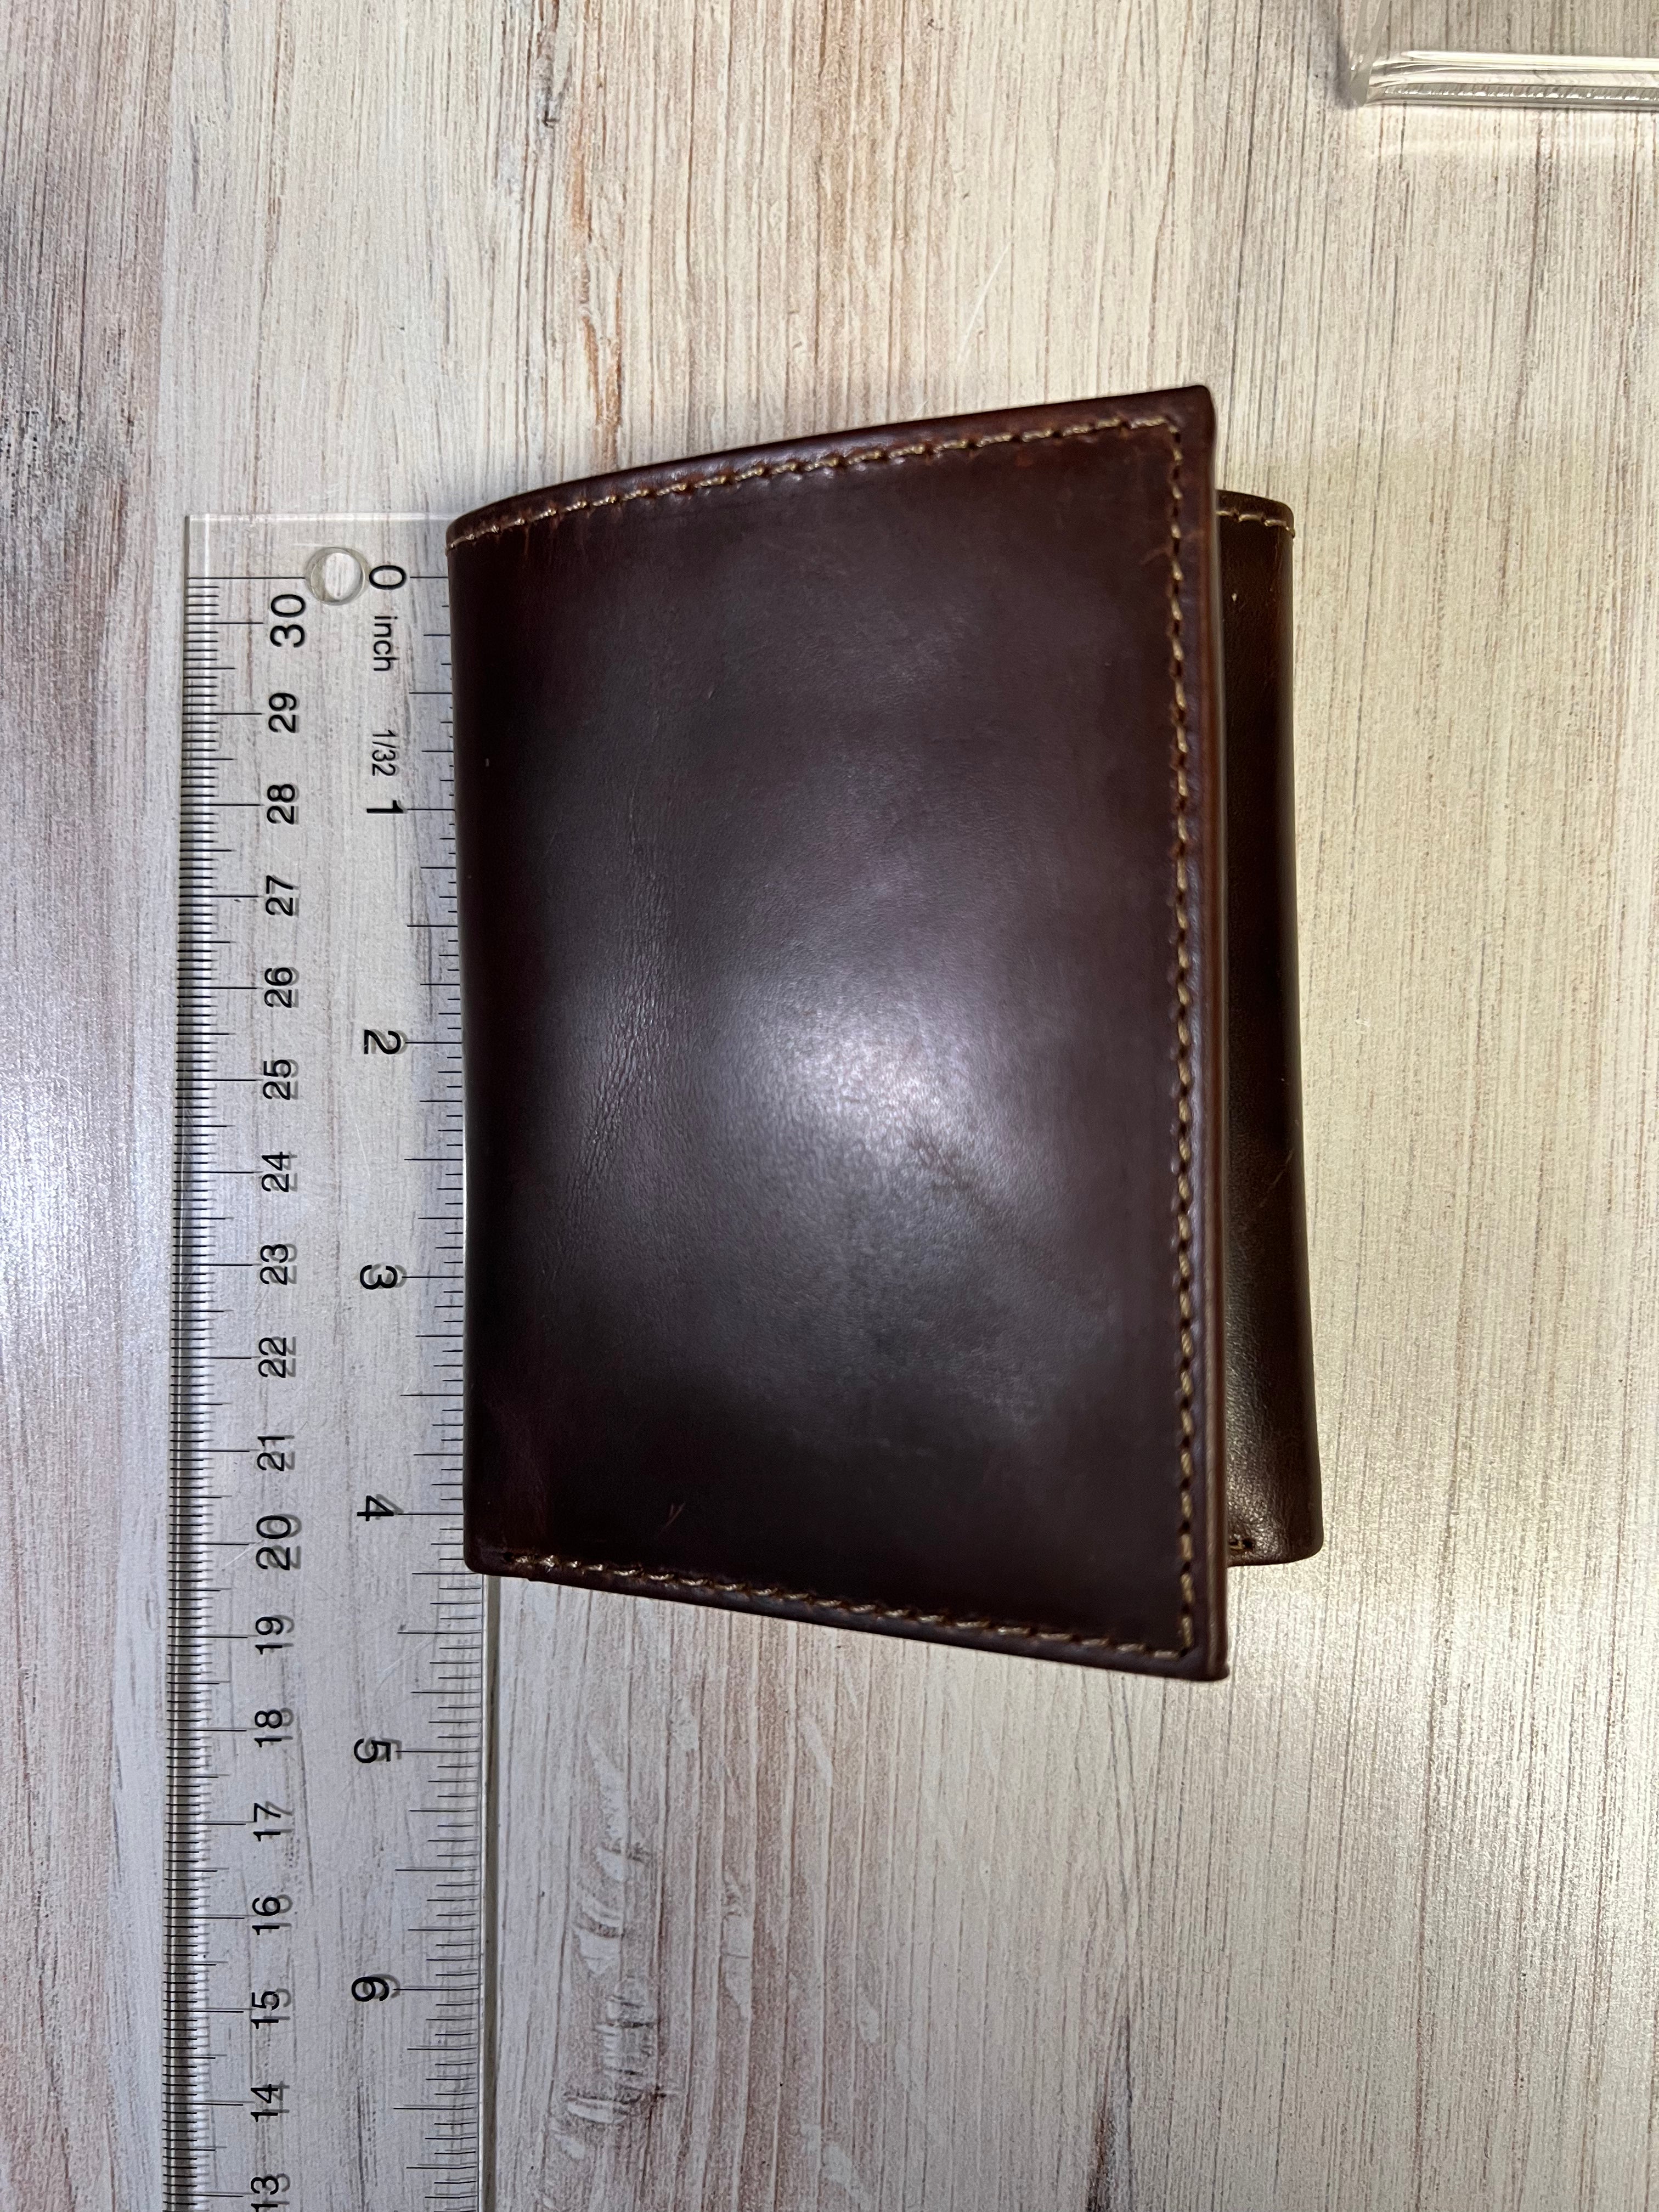 Brown Leather Trifold Wallet A54359